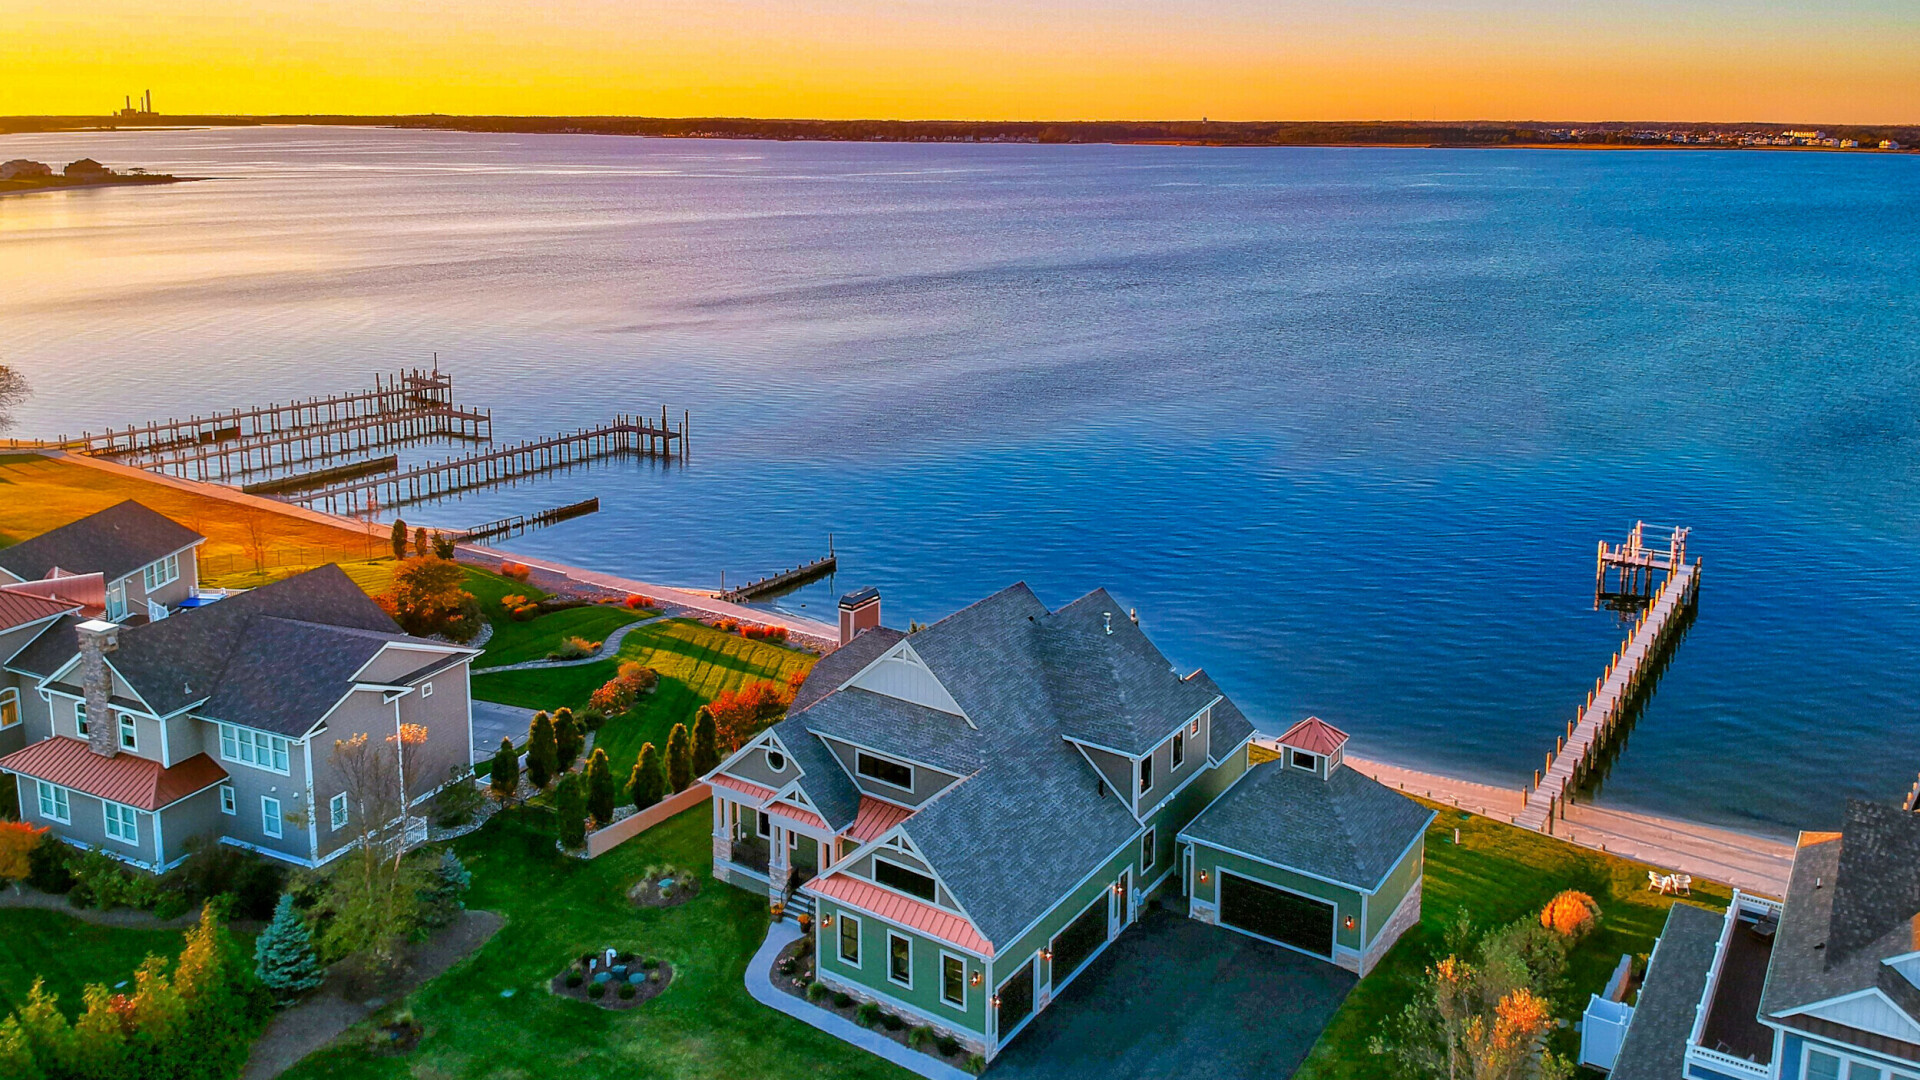 Aerial view of luxury waterfront homes at sunset, Rehoboth Beach DE